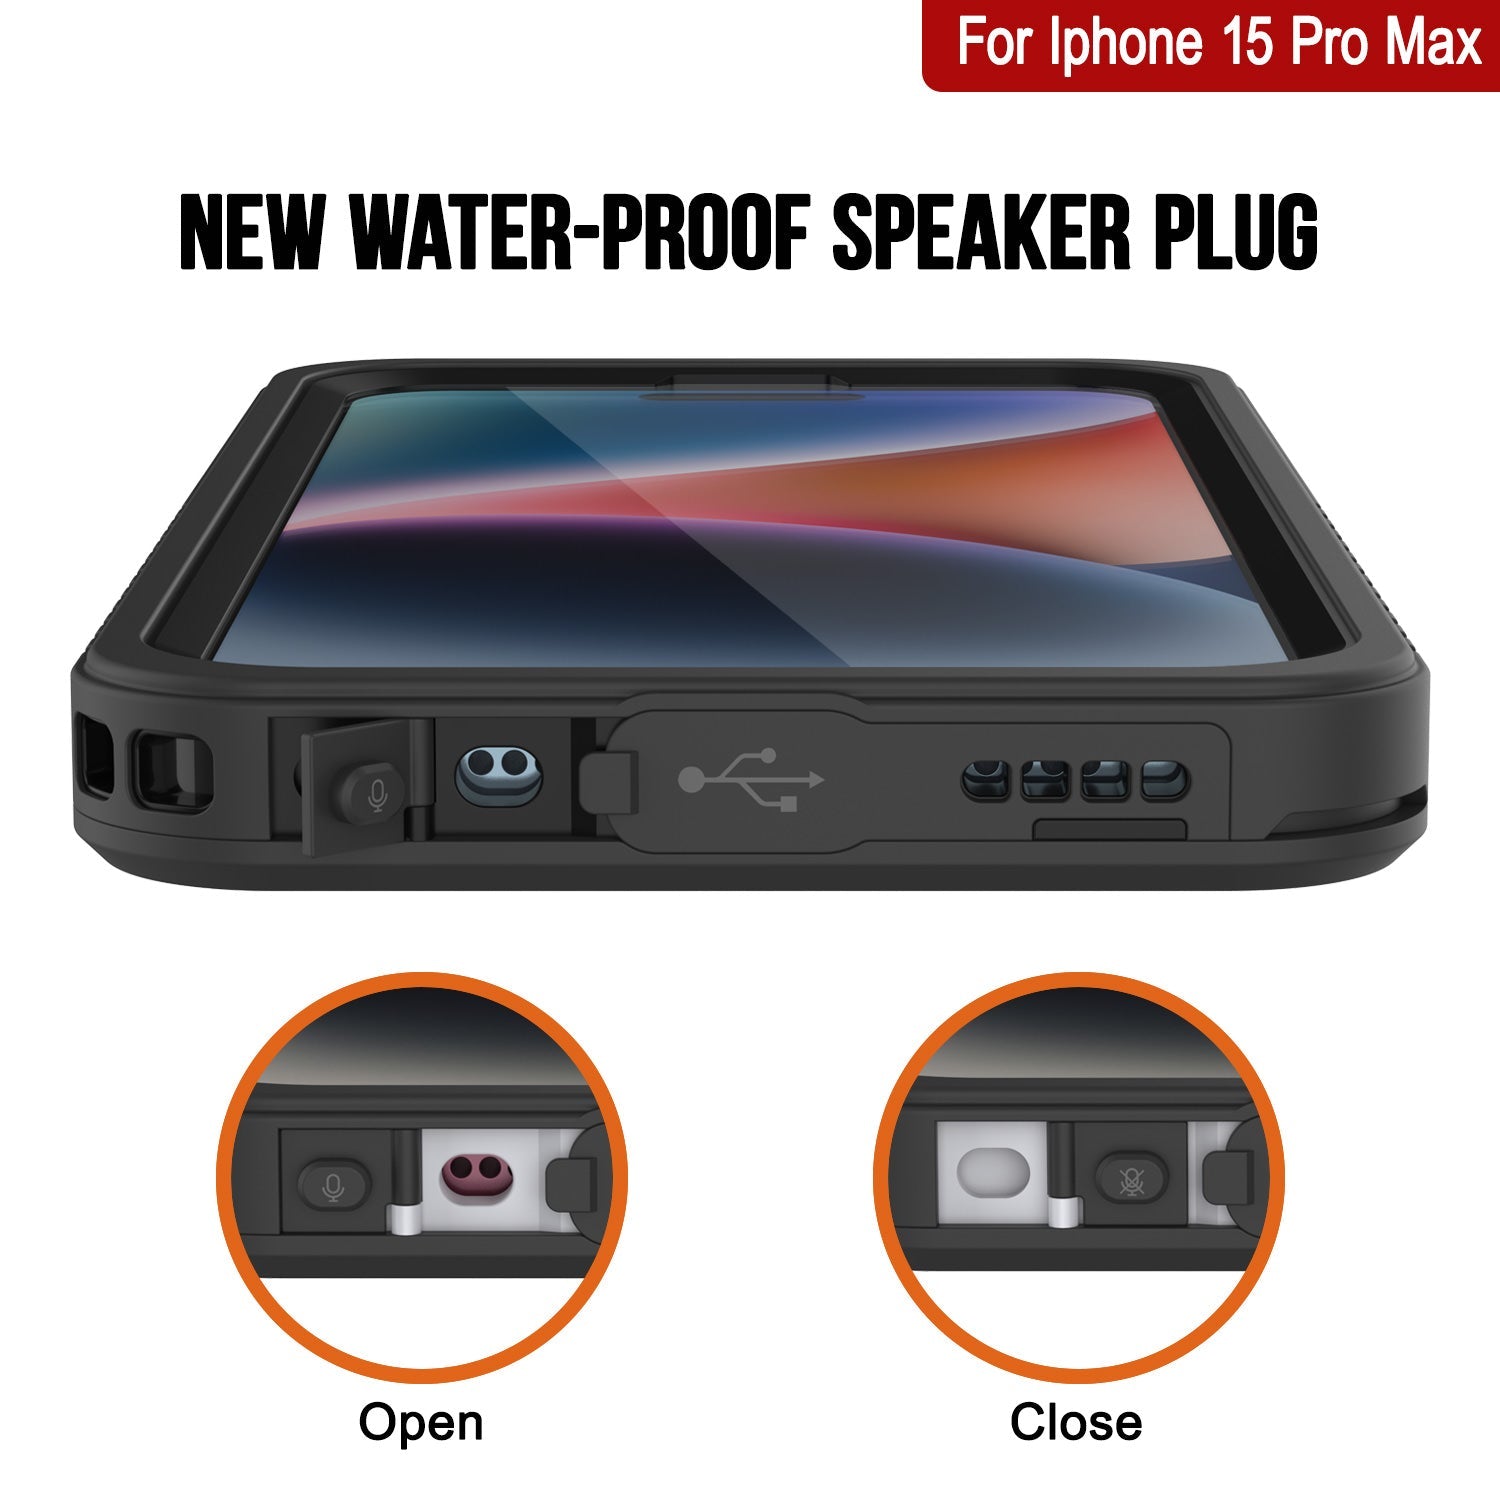 iPhone 15 Pro Max Waterproof Case, Punkcase [Extreme Series] Armor Cover W/ Built In Screen Protector [Black]